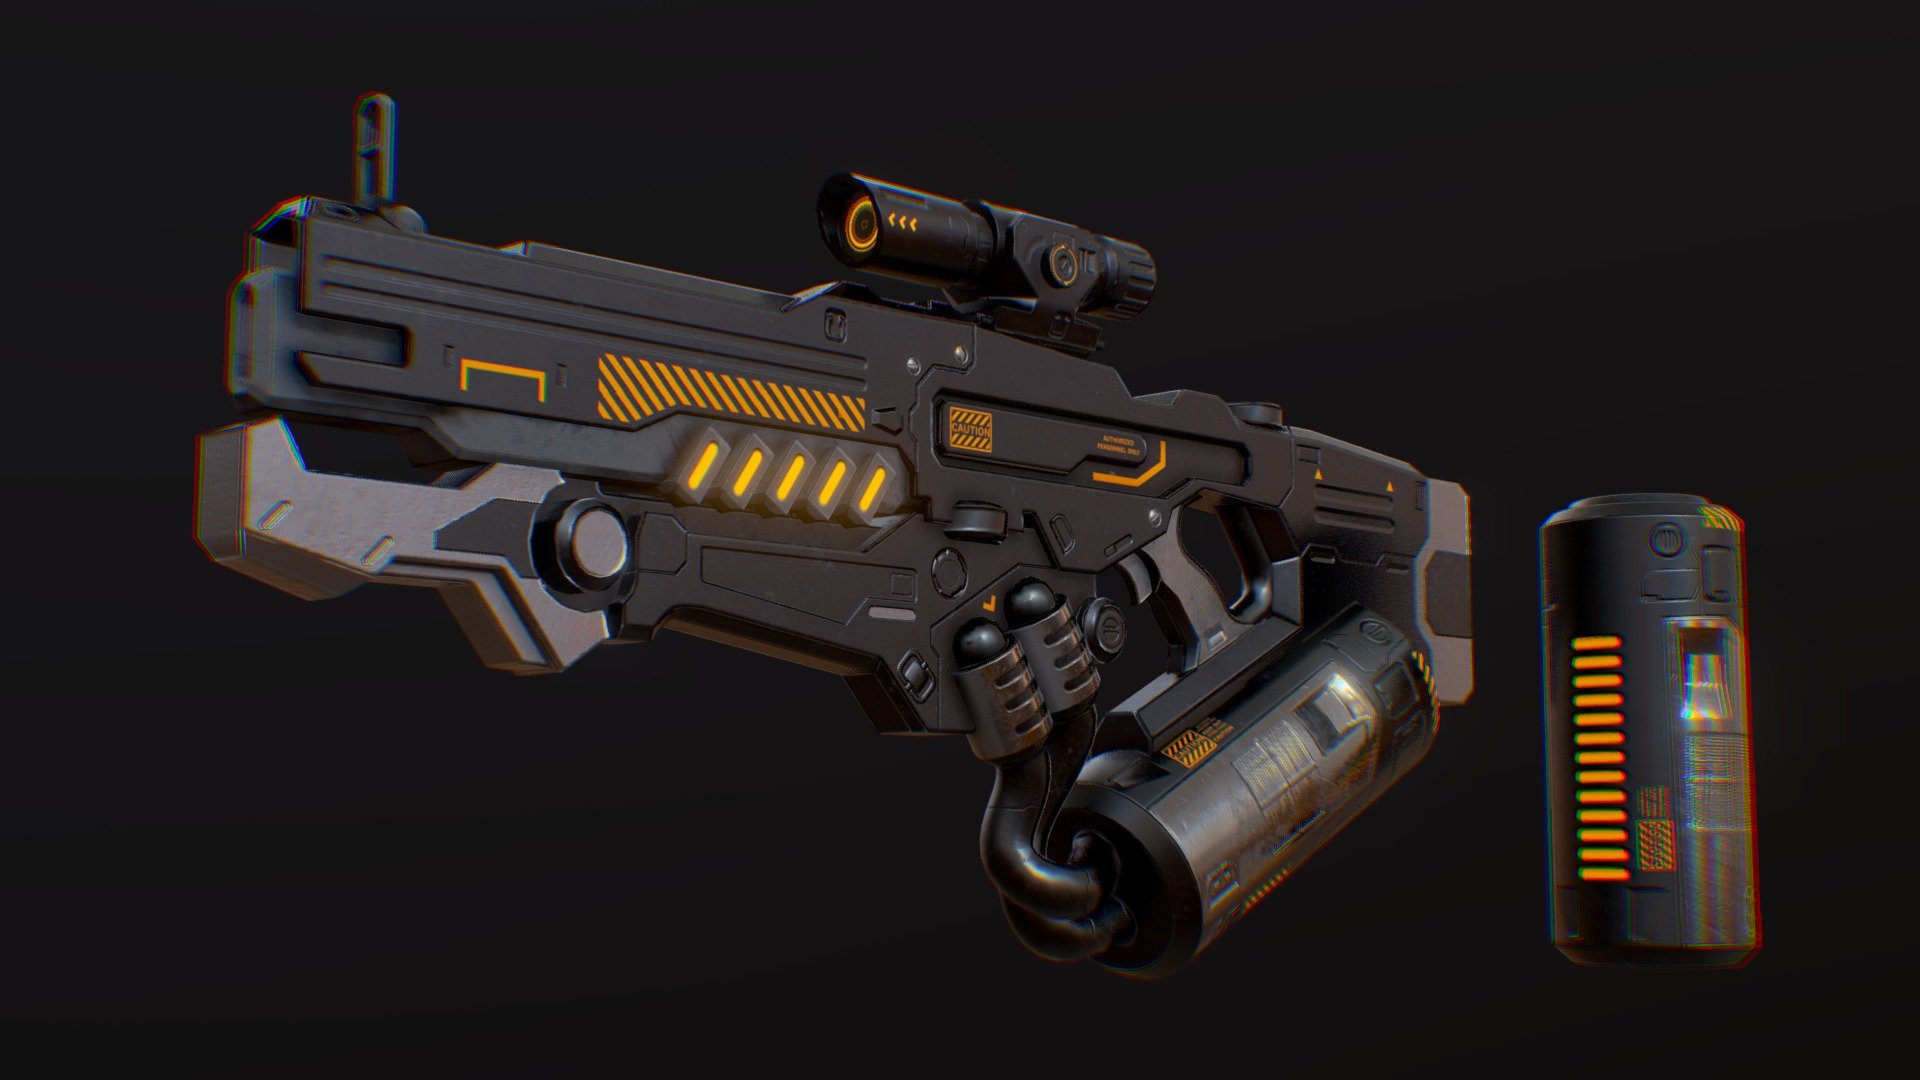 Model of a futuristic pulse rifle. 

Made in Blender + Substance Painter, with 2k textures, baked bevels and AO. Free to use 3d model